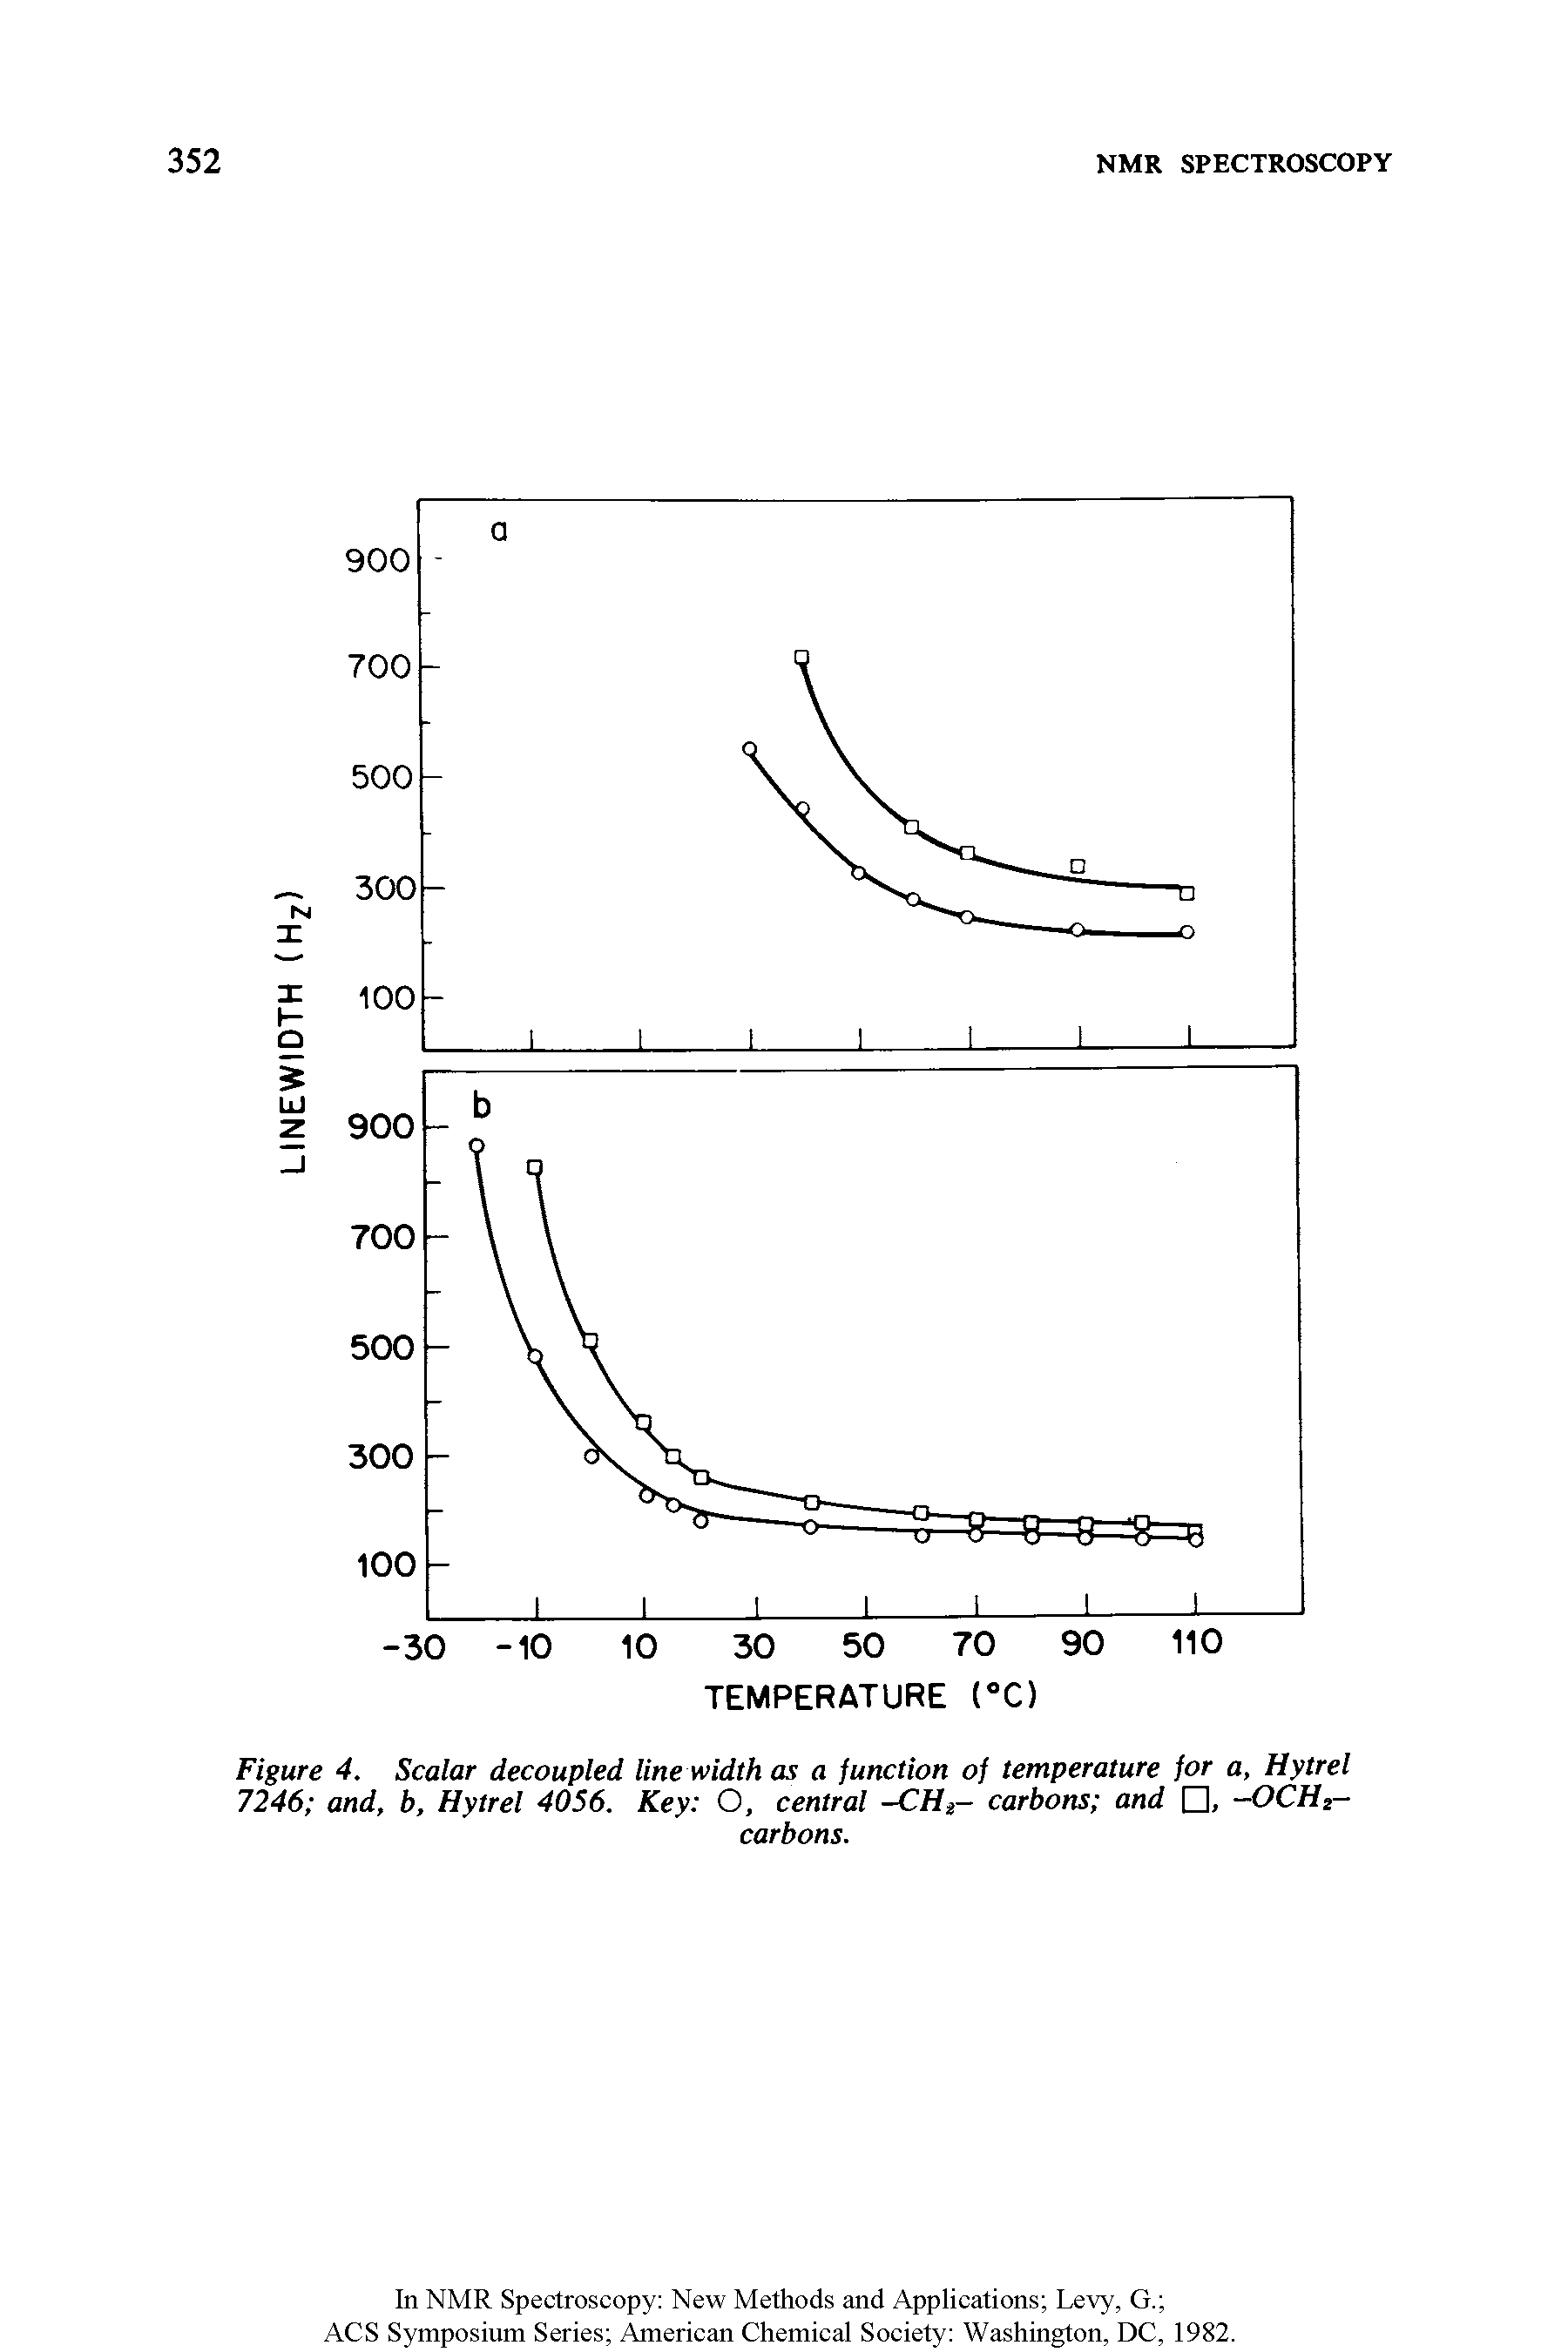 Figure 4. Scalar decoupled line width as a function of temperature for a, Hytrel 7246 and, b, Hytrel 4056. Key O, central -CH - carbons and , -OCHi-...